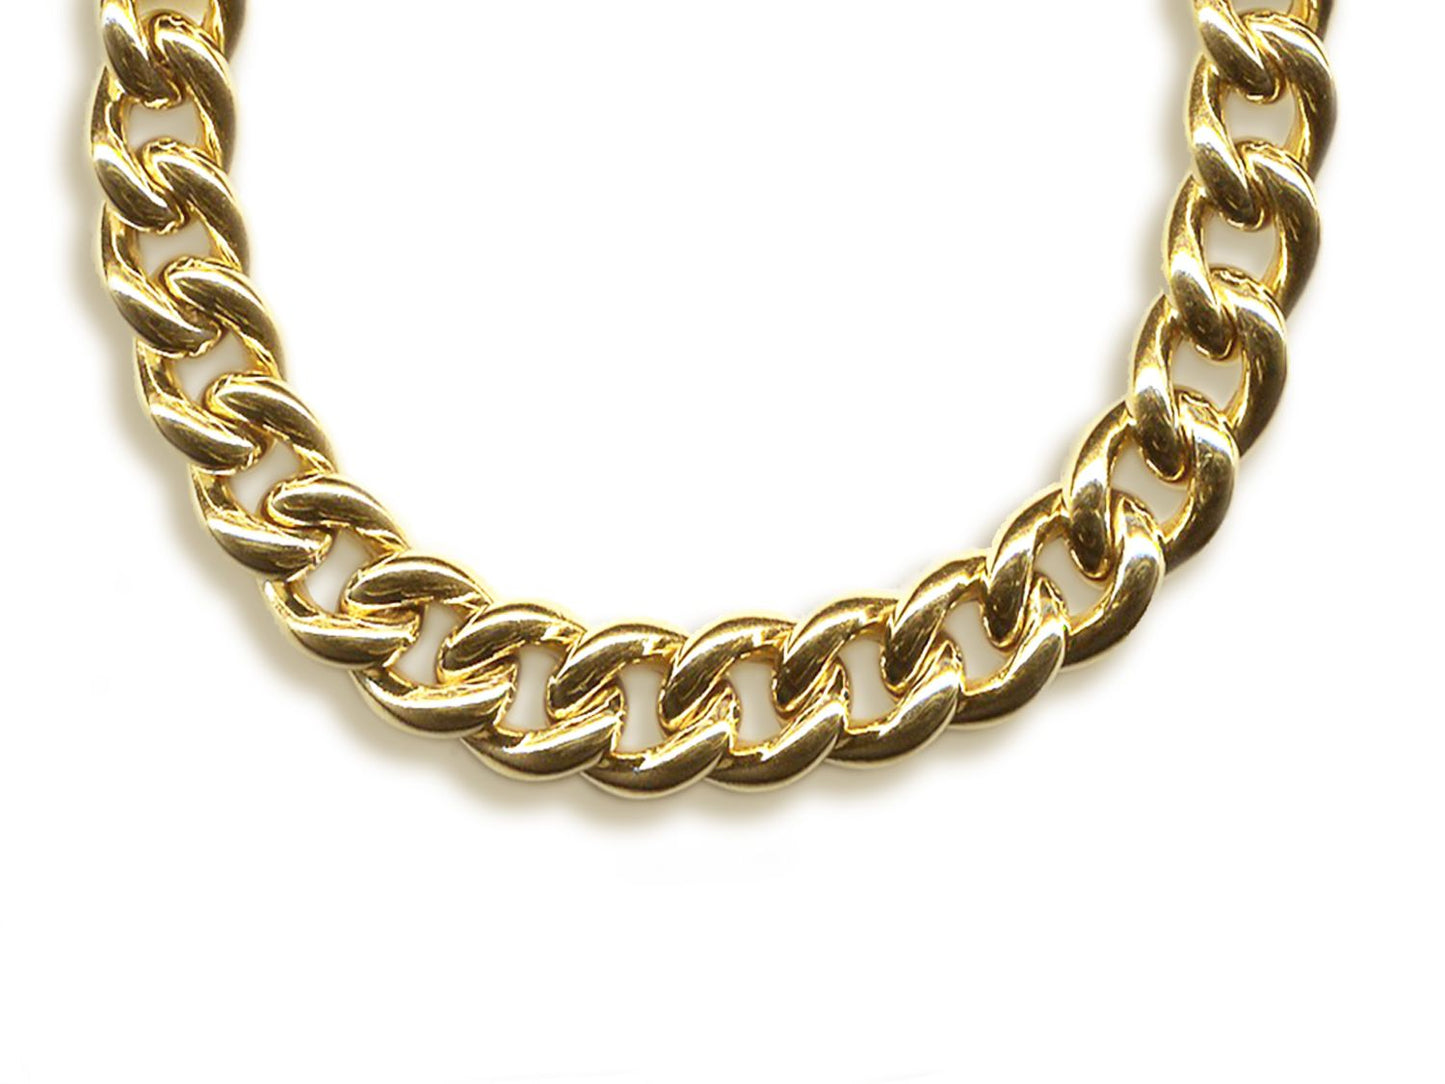 9ct Yellow Gold Curb Link Bracelet